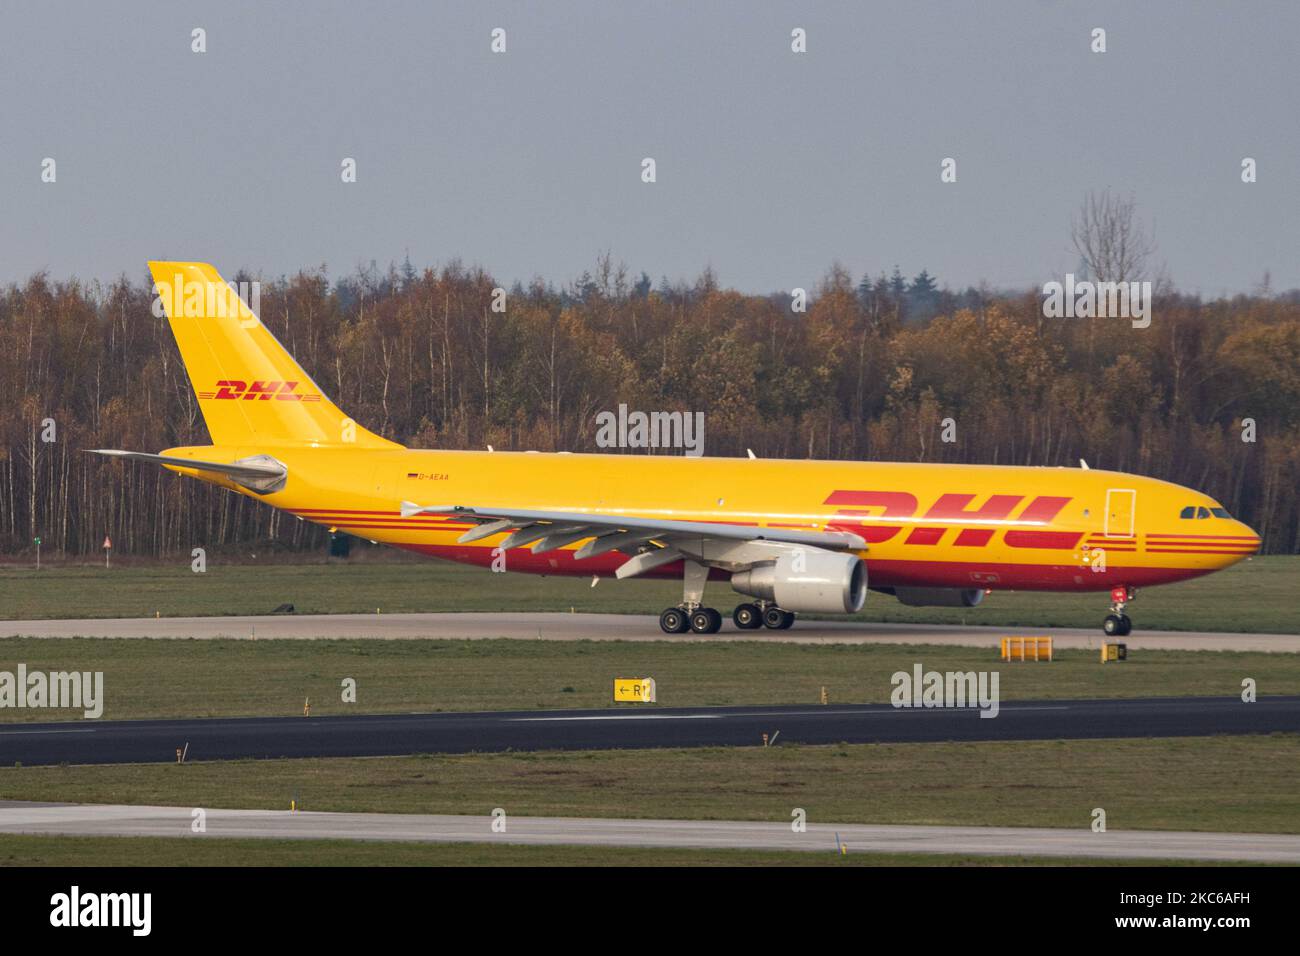 Airbus A300 DHL - EAT Leipzig cargo freight aircraft as seen taxiing, departing and flying from Eindhoven Airport EIN EHEH. The wide-body Airbus A300-600(F) airplane has the registration D-AEAA. DHL Aviation, a division of DHL Express ( Dalsey, Hillblom and Lynn) International GmbH is a German courier, parcel, and express mail service which is a division of the German logistics company Deutsche Post DHL. The world passenger traffic declined during the coronavirus covid-19 pandemic era with the industry struggling to survive in contrast with the freight and cargo airlines that are thriving. Ein Stock Photo